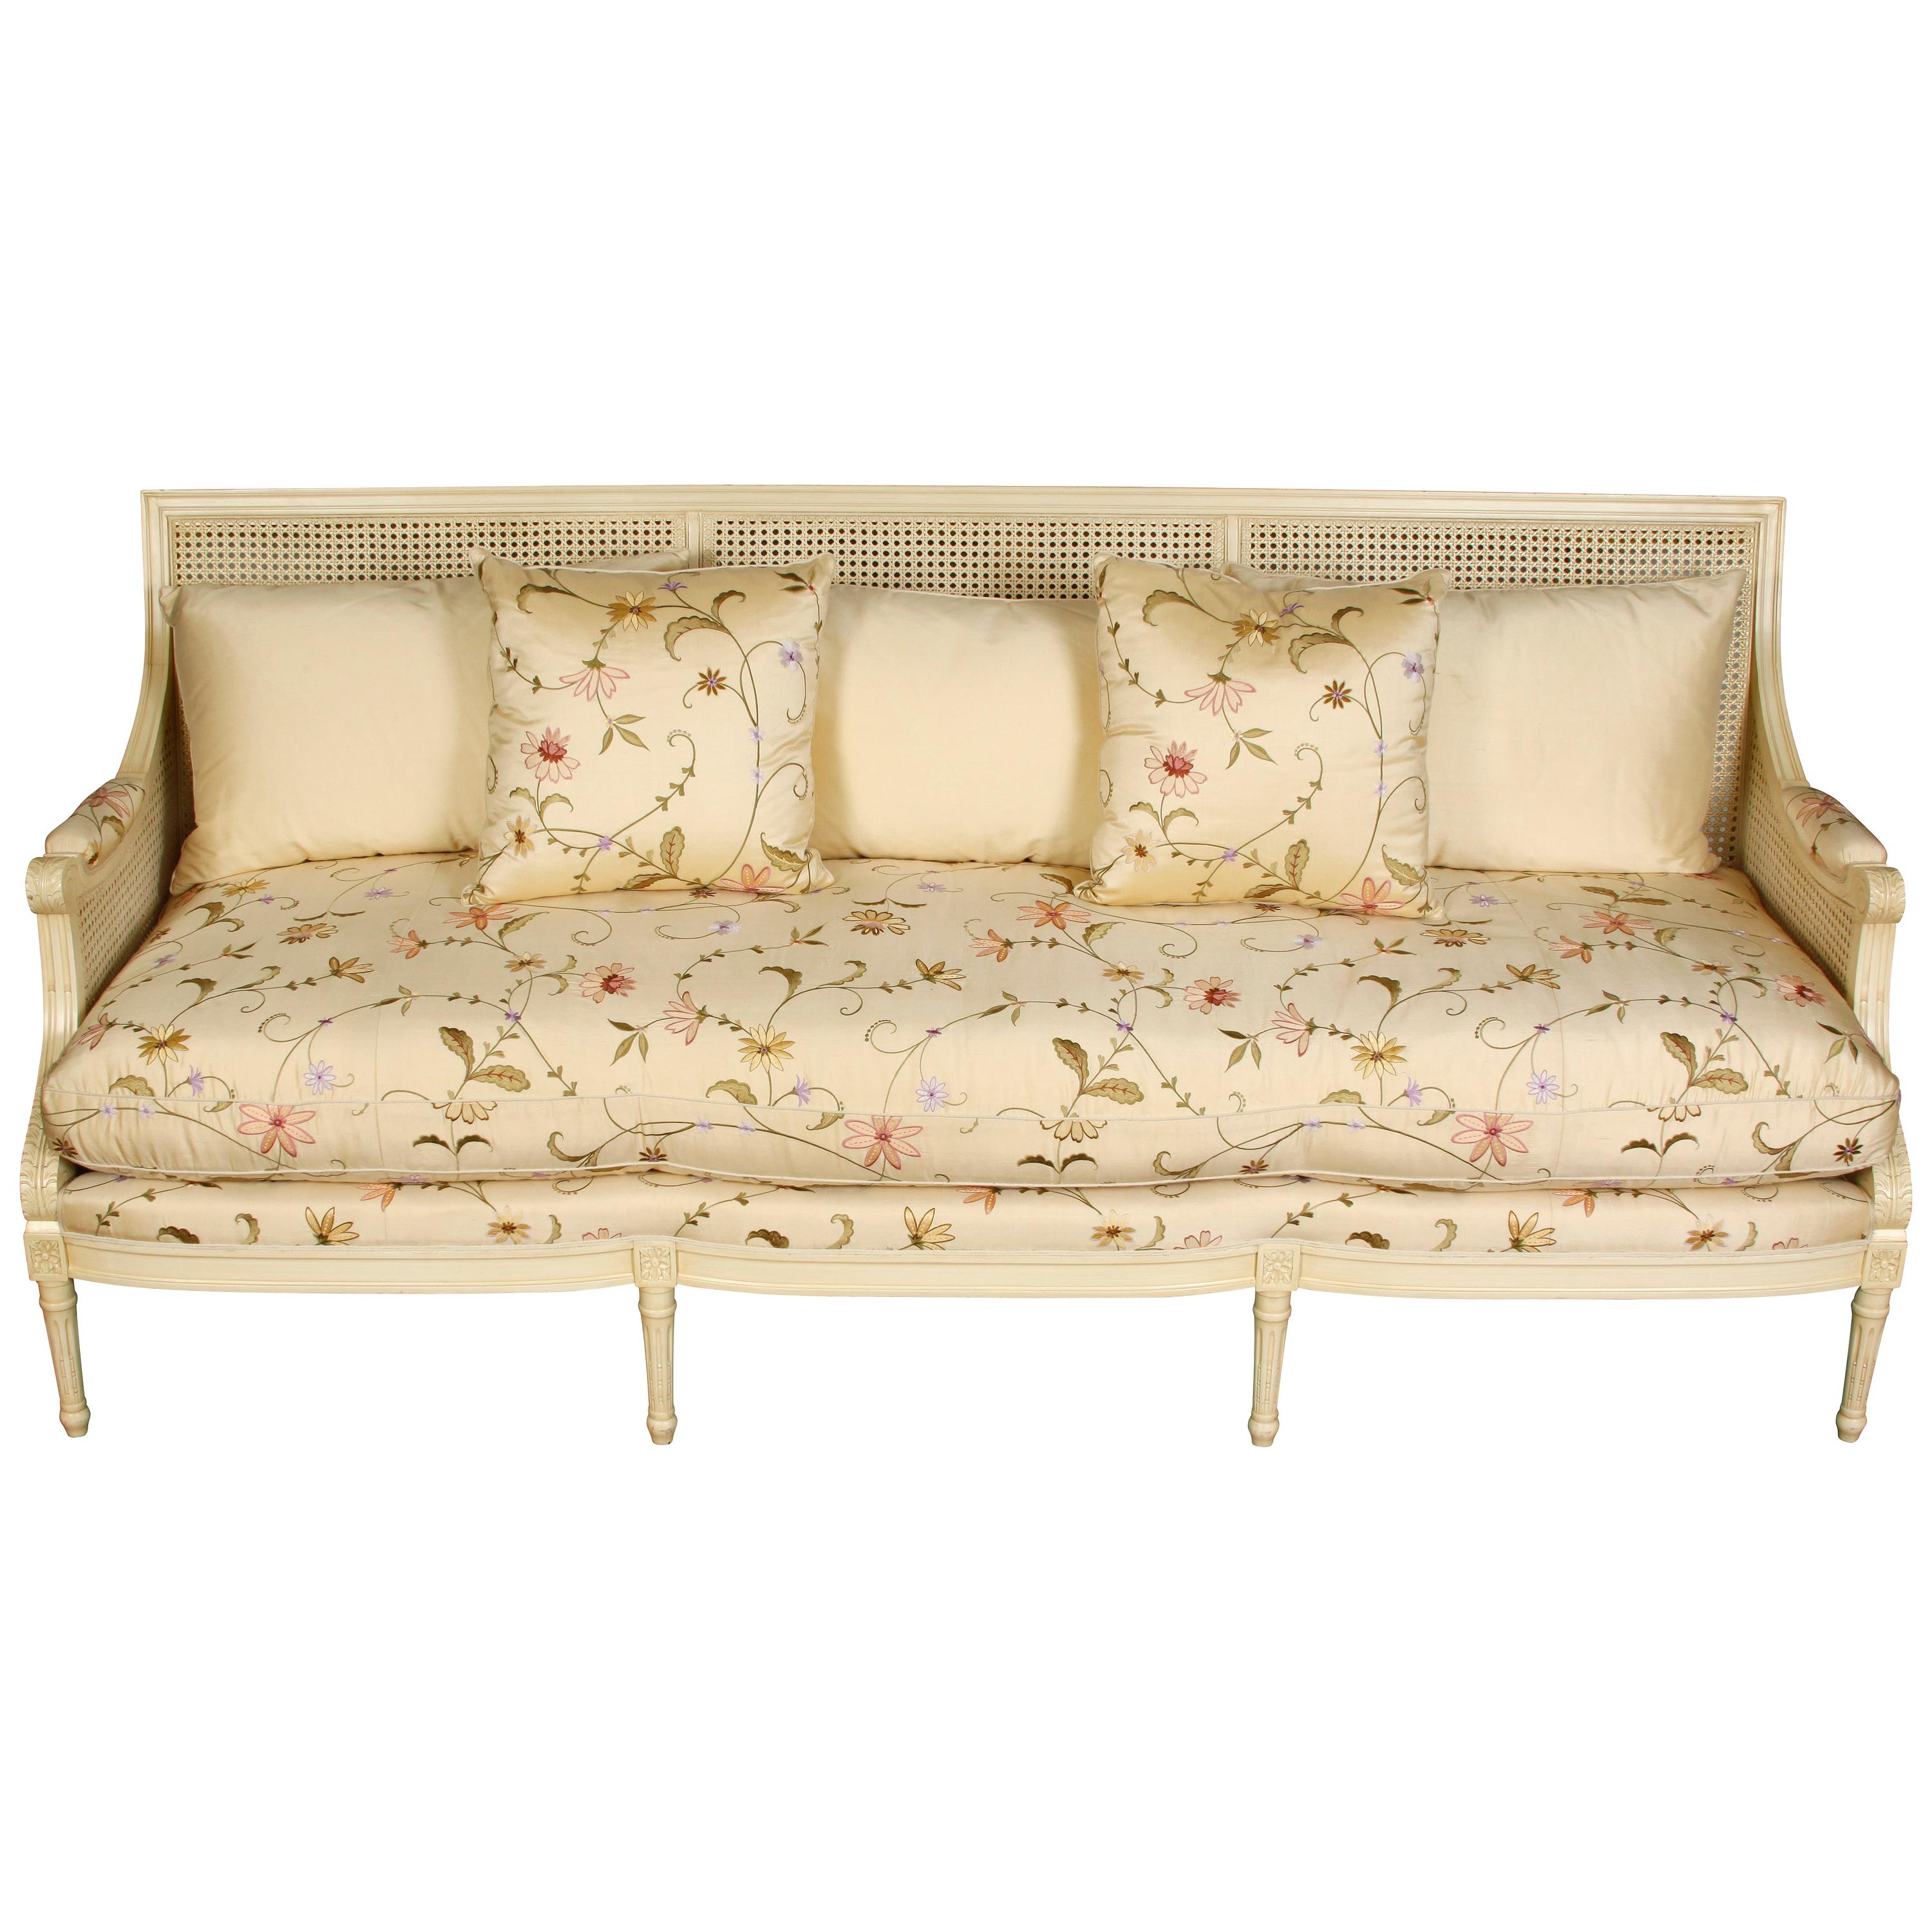 Beautiful Ivory Settee with Silk Floral Fabric